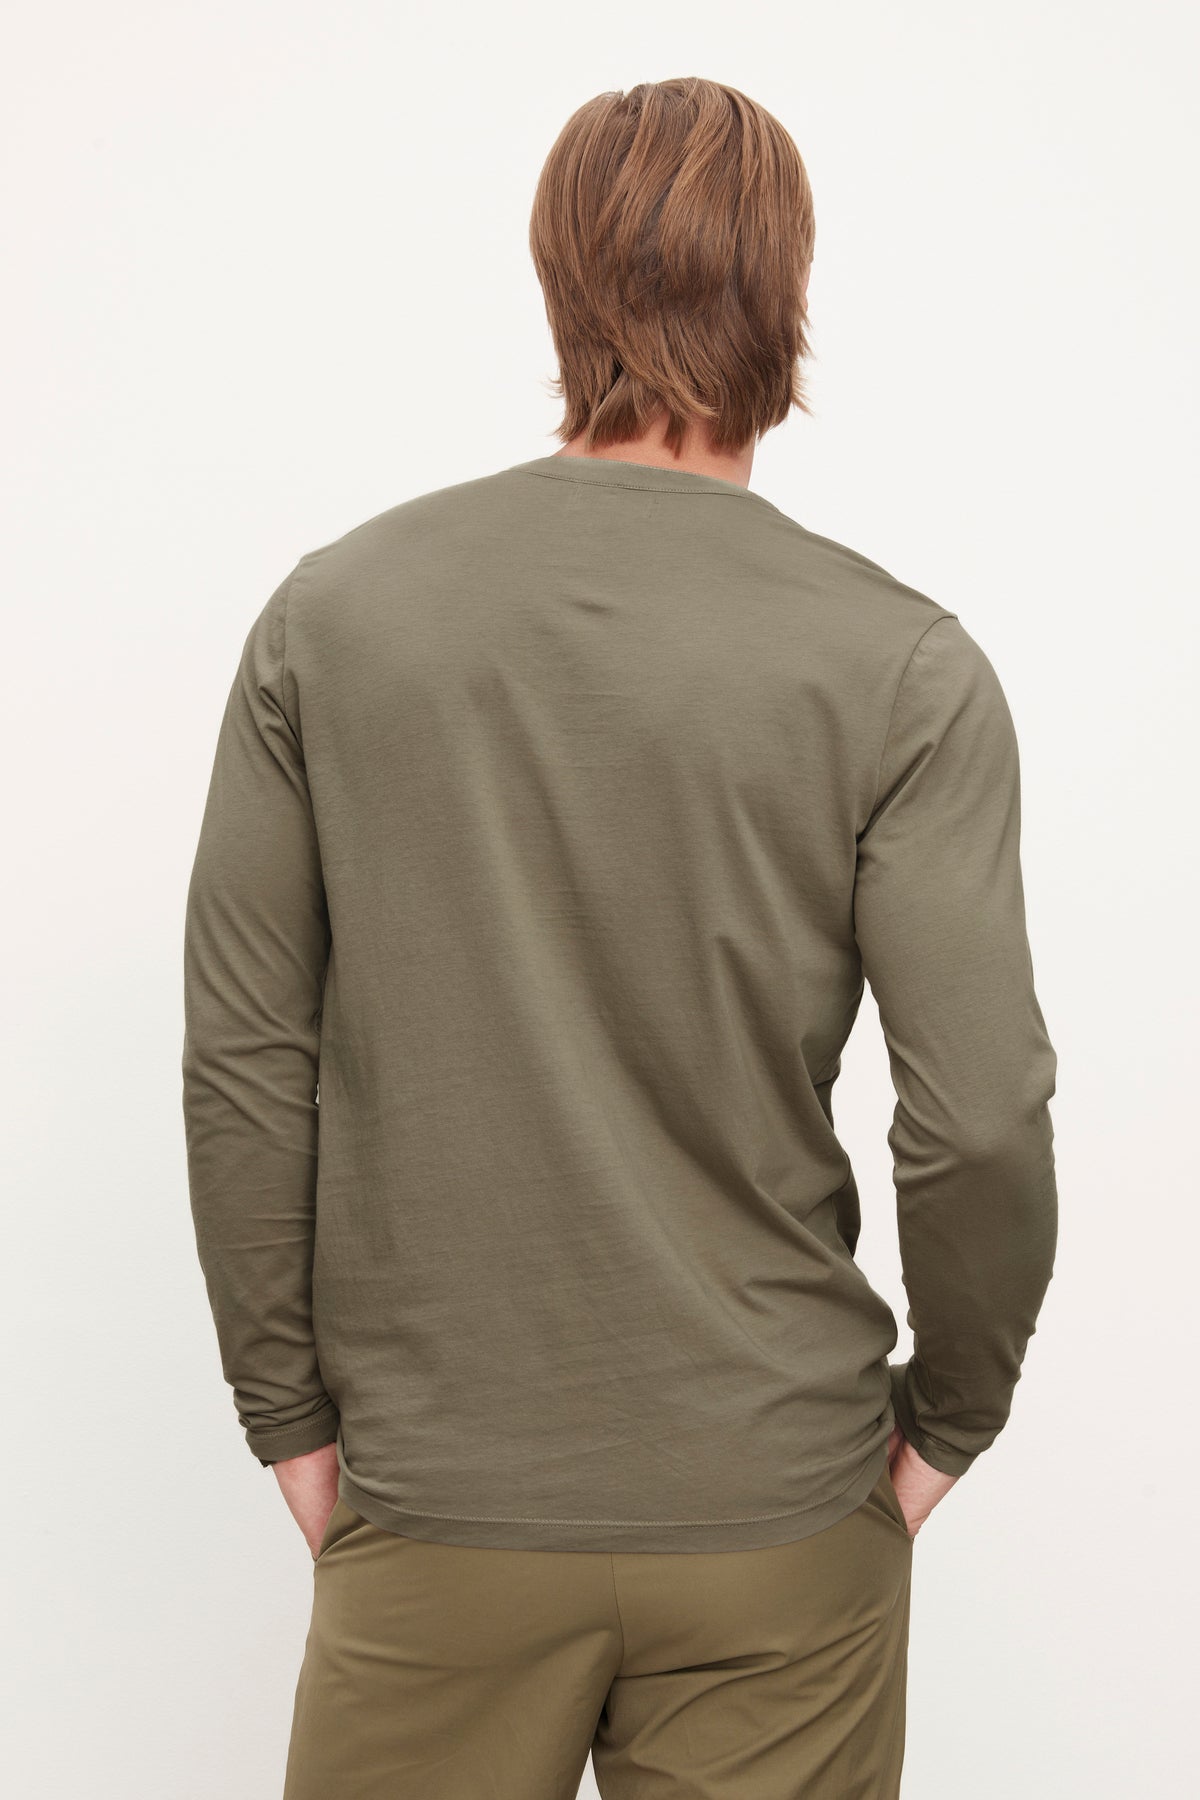 Man in olive green Velvet by Graham & Spencer ALVARO COTTON JERSEY HENLEY shirt and trousers, viewed from the back, standing against a white background.-36009056436417